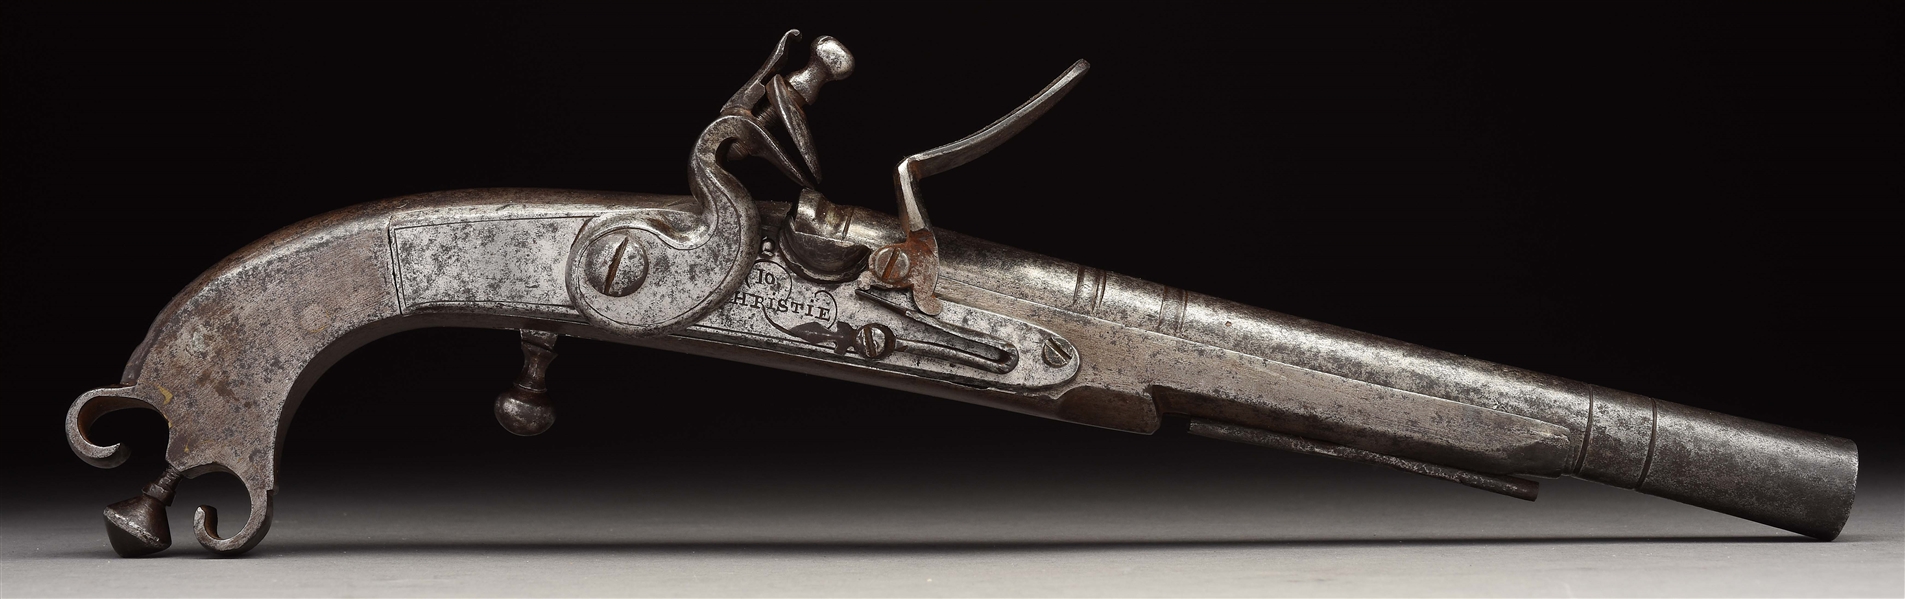 (A) SCOTTISH ALL STEEL FLINTLOCK PISTOL BY CHRISTIE MARKED FOR THE 42ND ROYAL HIGHLAND "BLACK WATCH" REGIMENT.